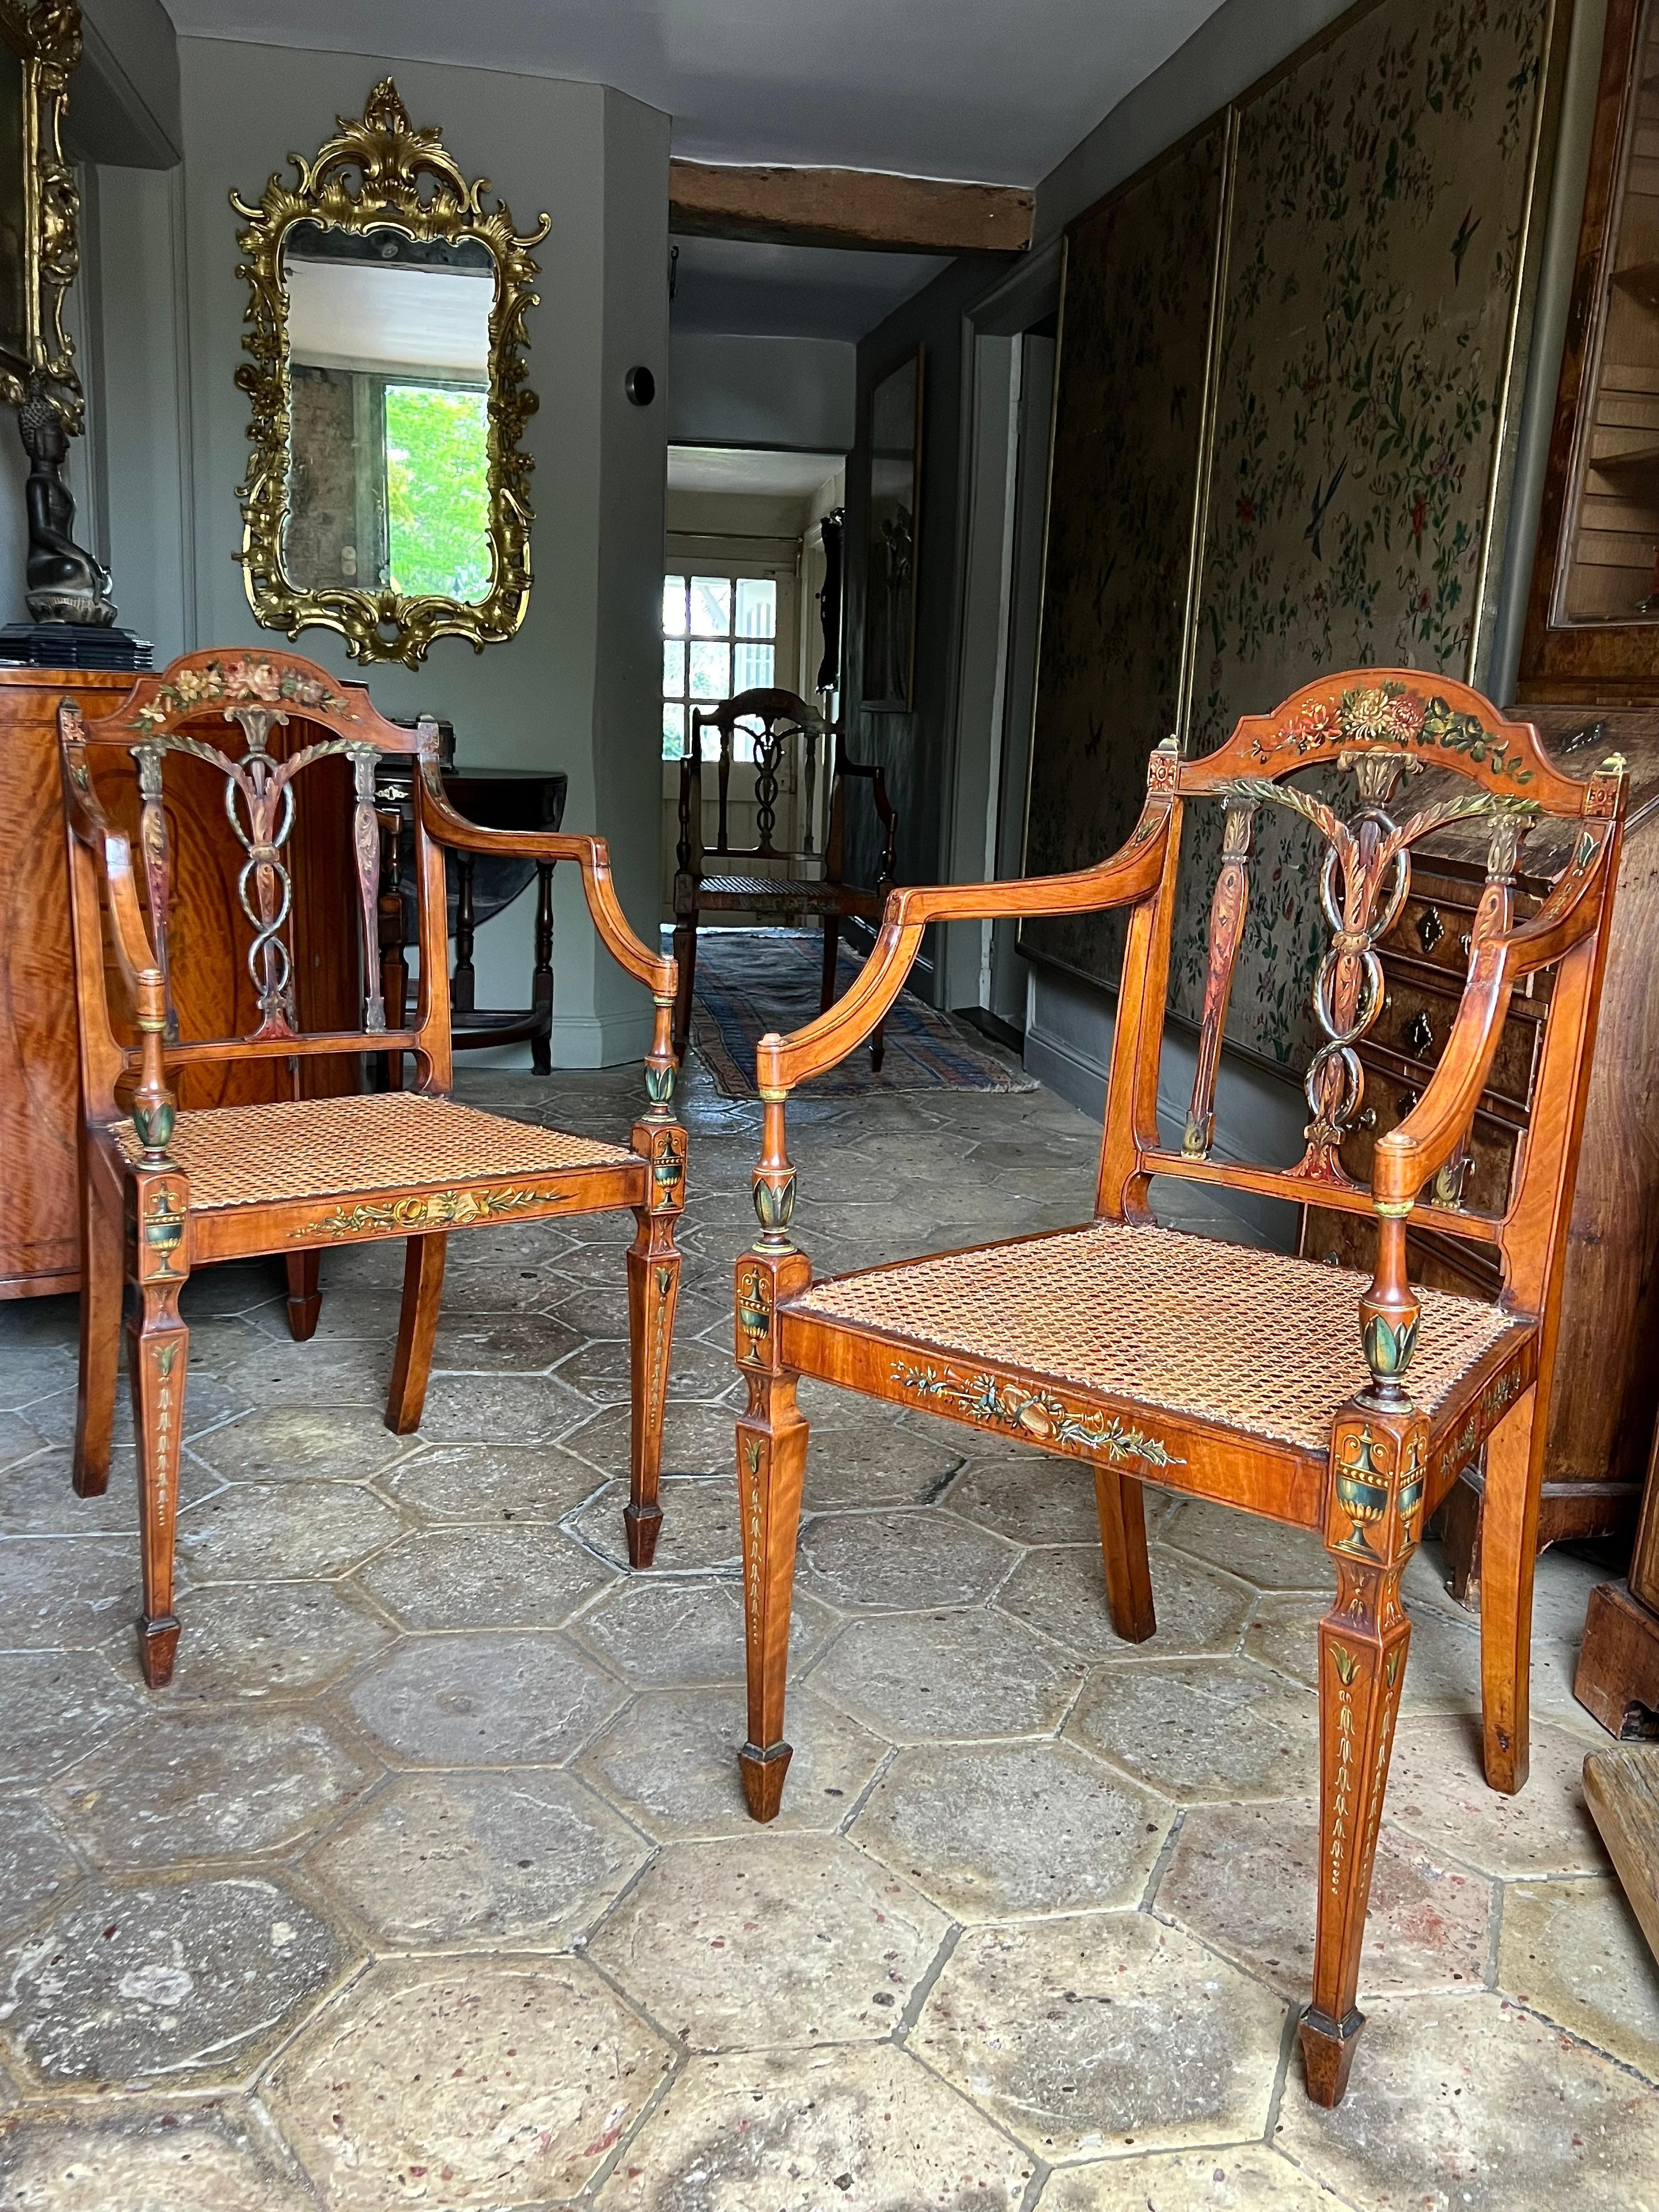 A fine and very rare set of four English late-18th century satinwood painted armchairs attributed to Seddon, Sons & Shackleton, ca 1790.

Retaining their wonderful, almost entirely original polychrome decoration. Note the Prince of Wales' feathers,